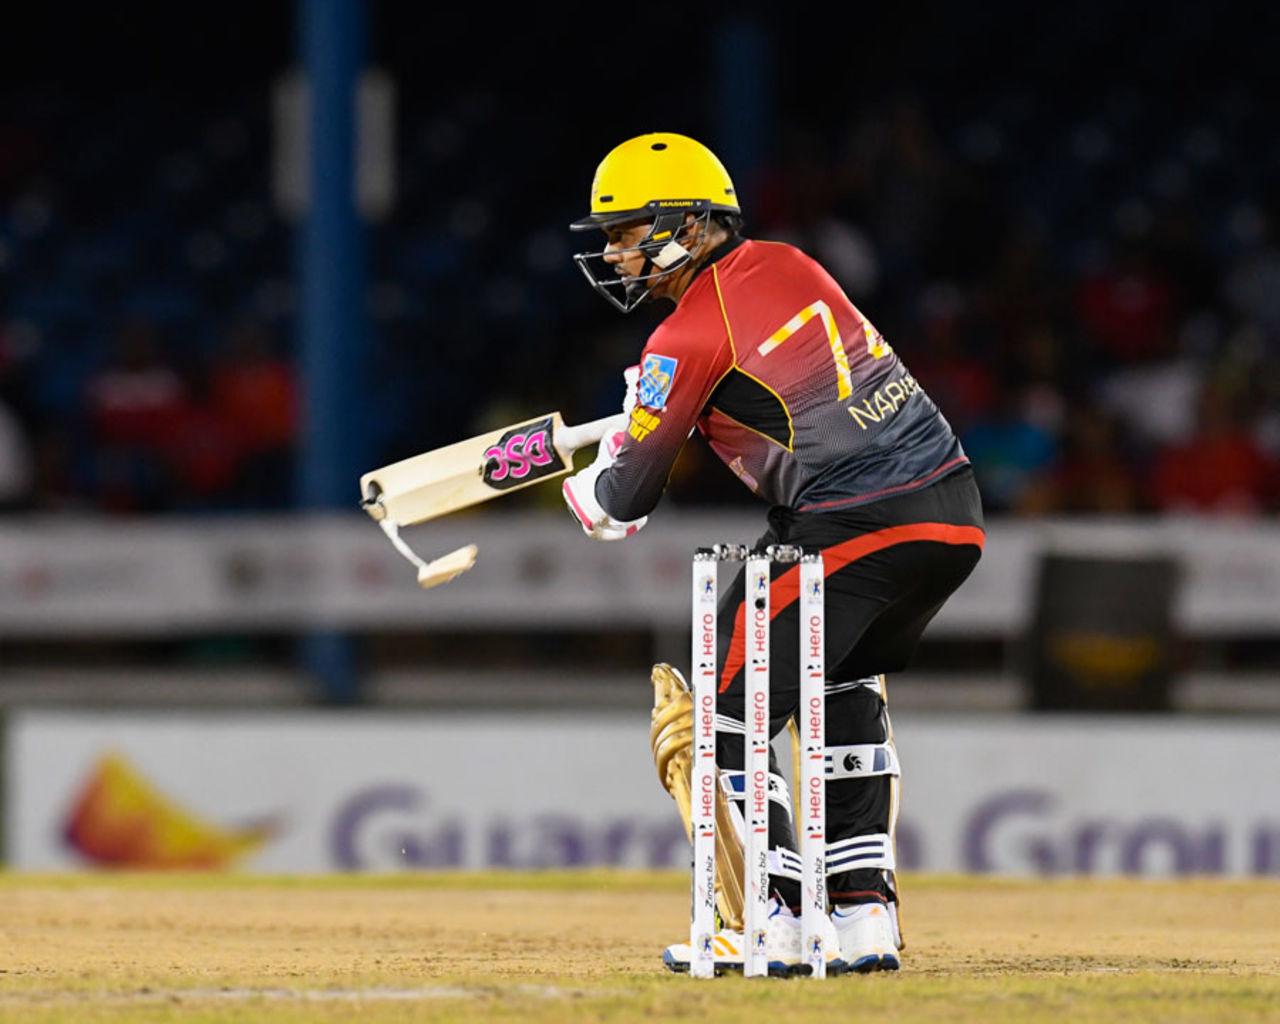 Sunil Narine's bat chips off at the bottom as he meets a full toss outside off, T&T Riders v Jamaica Tallawahs, CPL 2017, Port of Spain